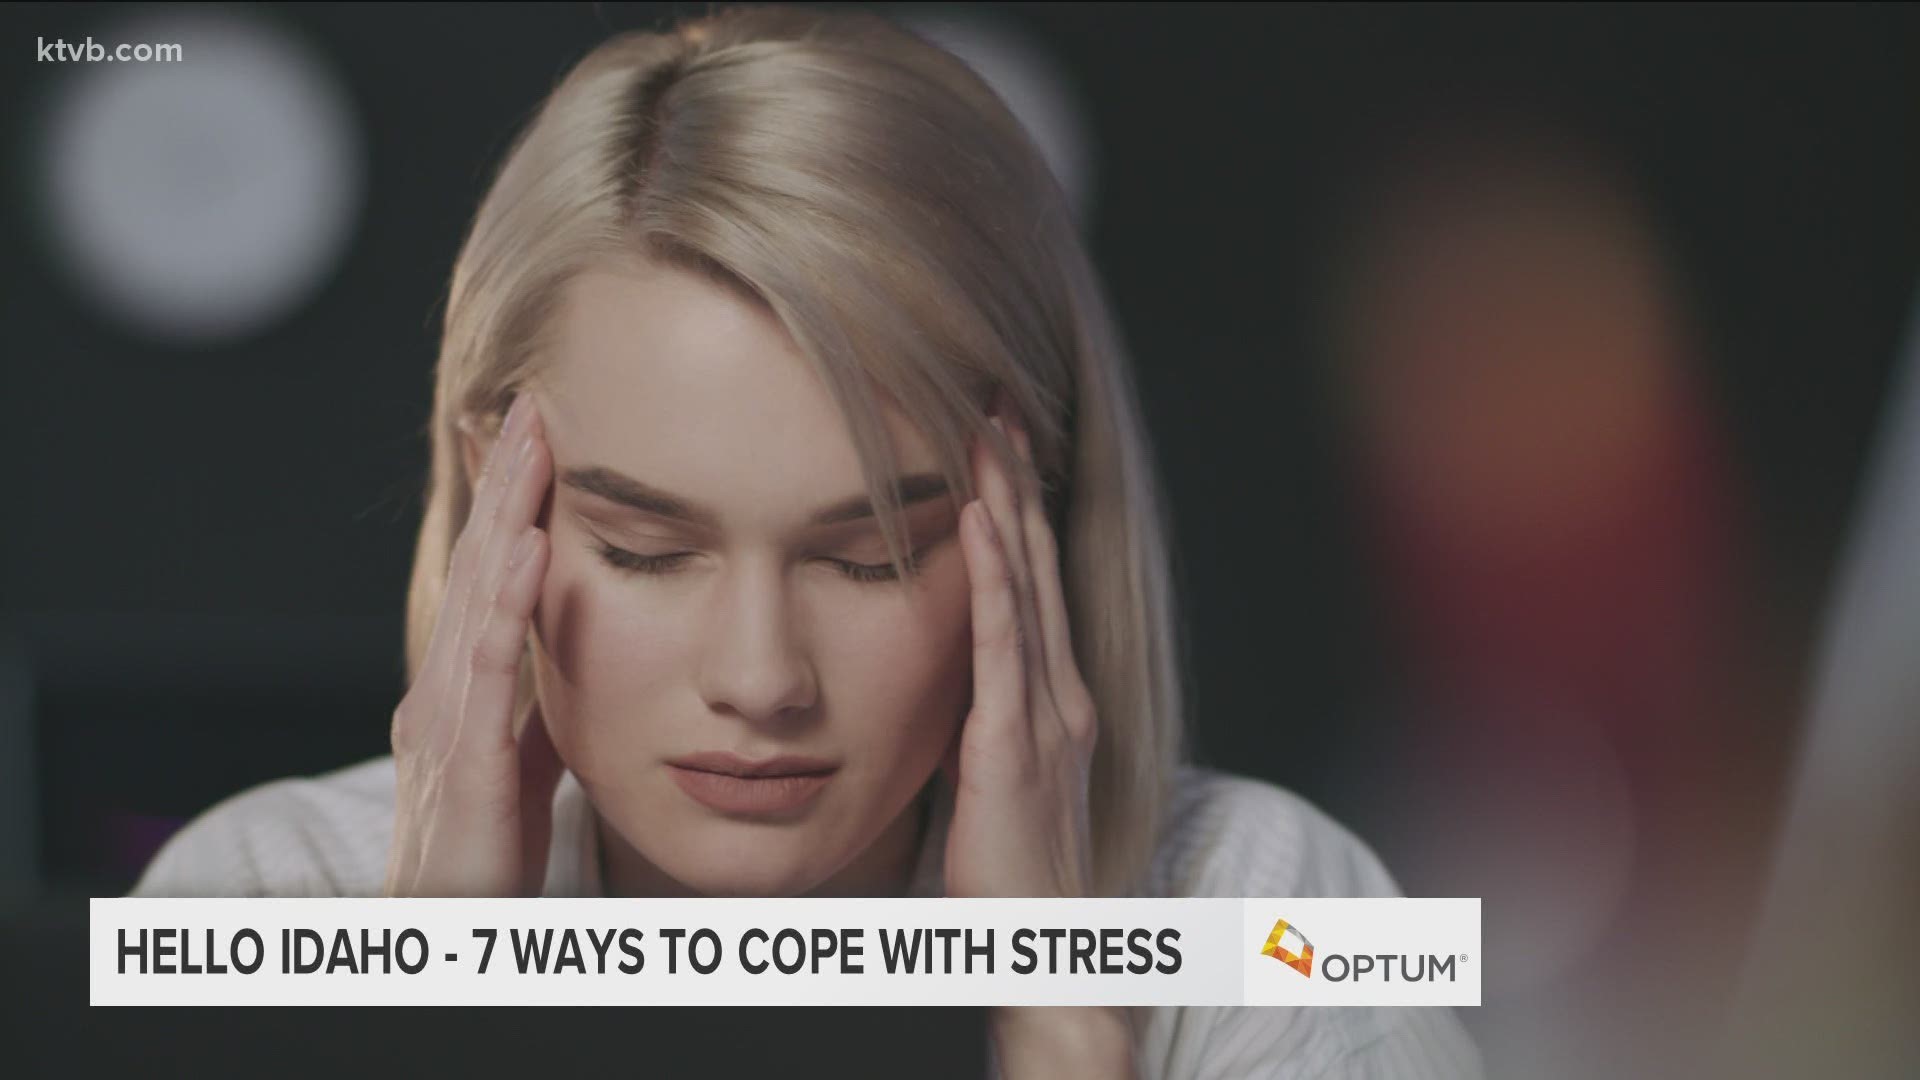 Almost a year into the pandemic, many of us are struggling to cope with day-to-day stress. Fortunately, there are some simple tips for alleviating that stress.